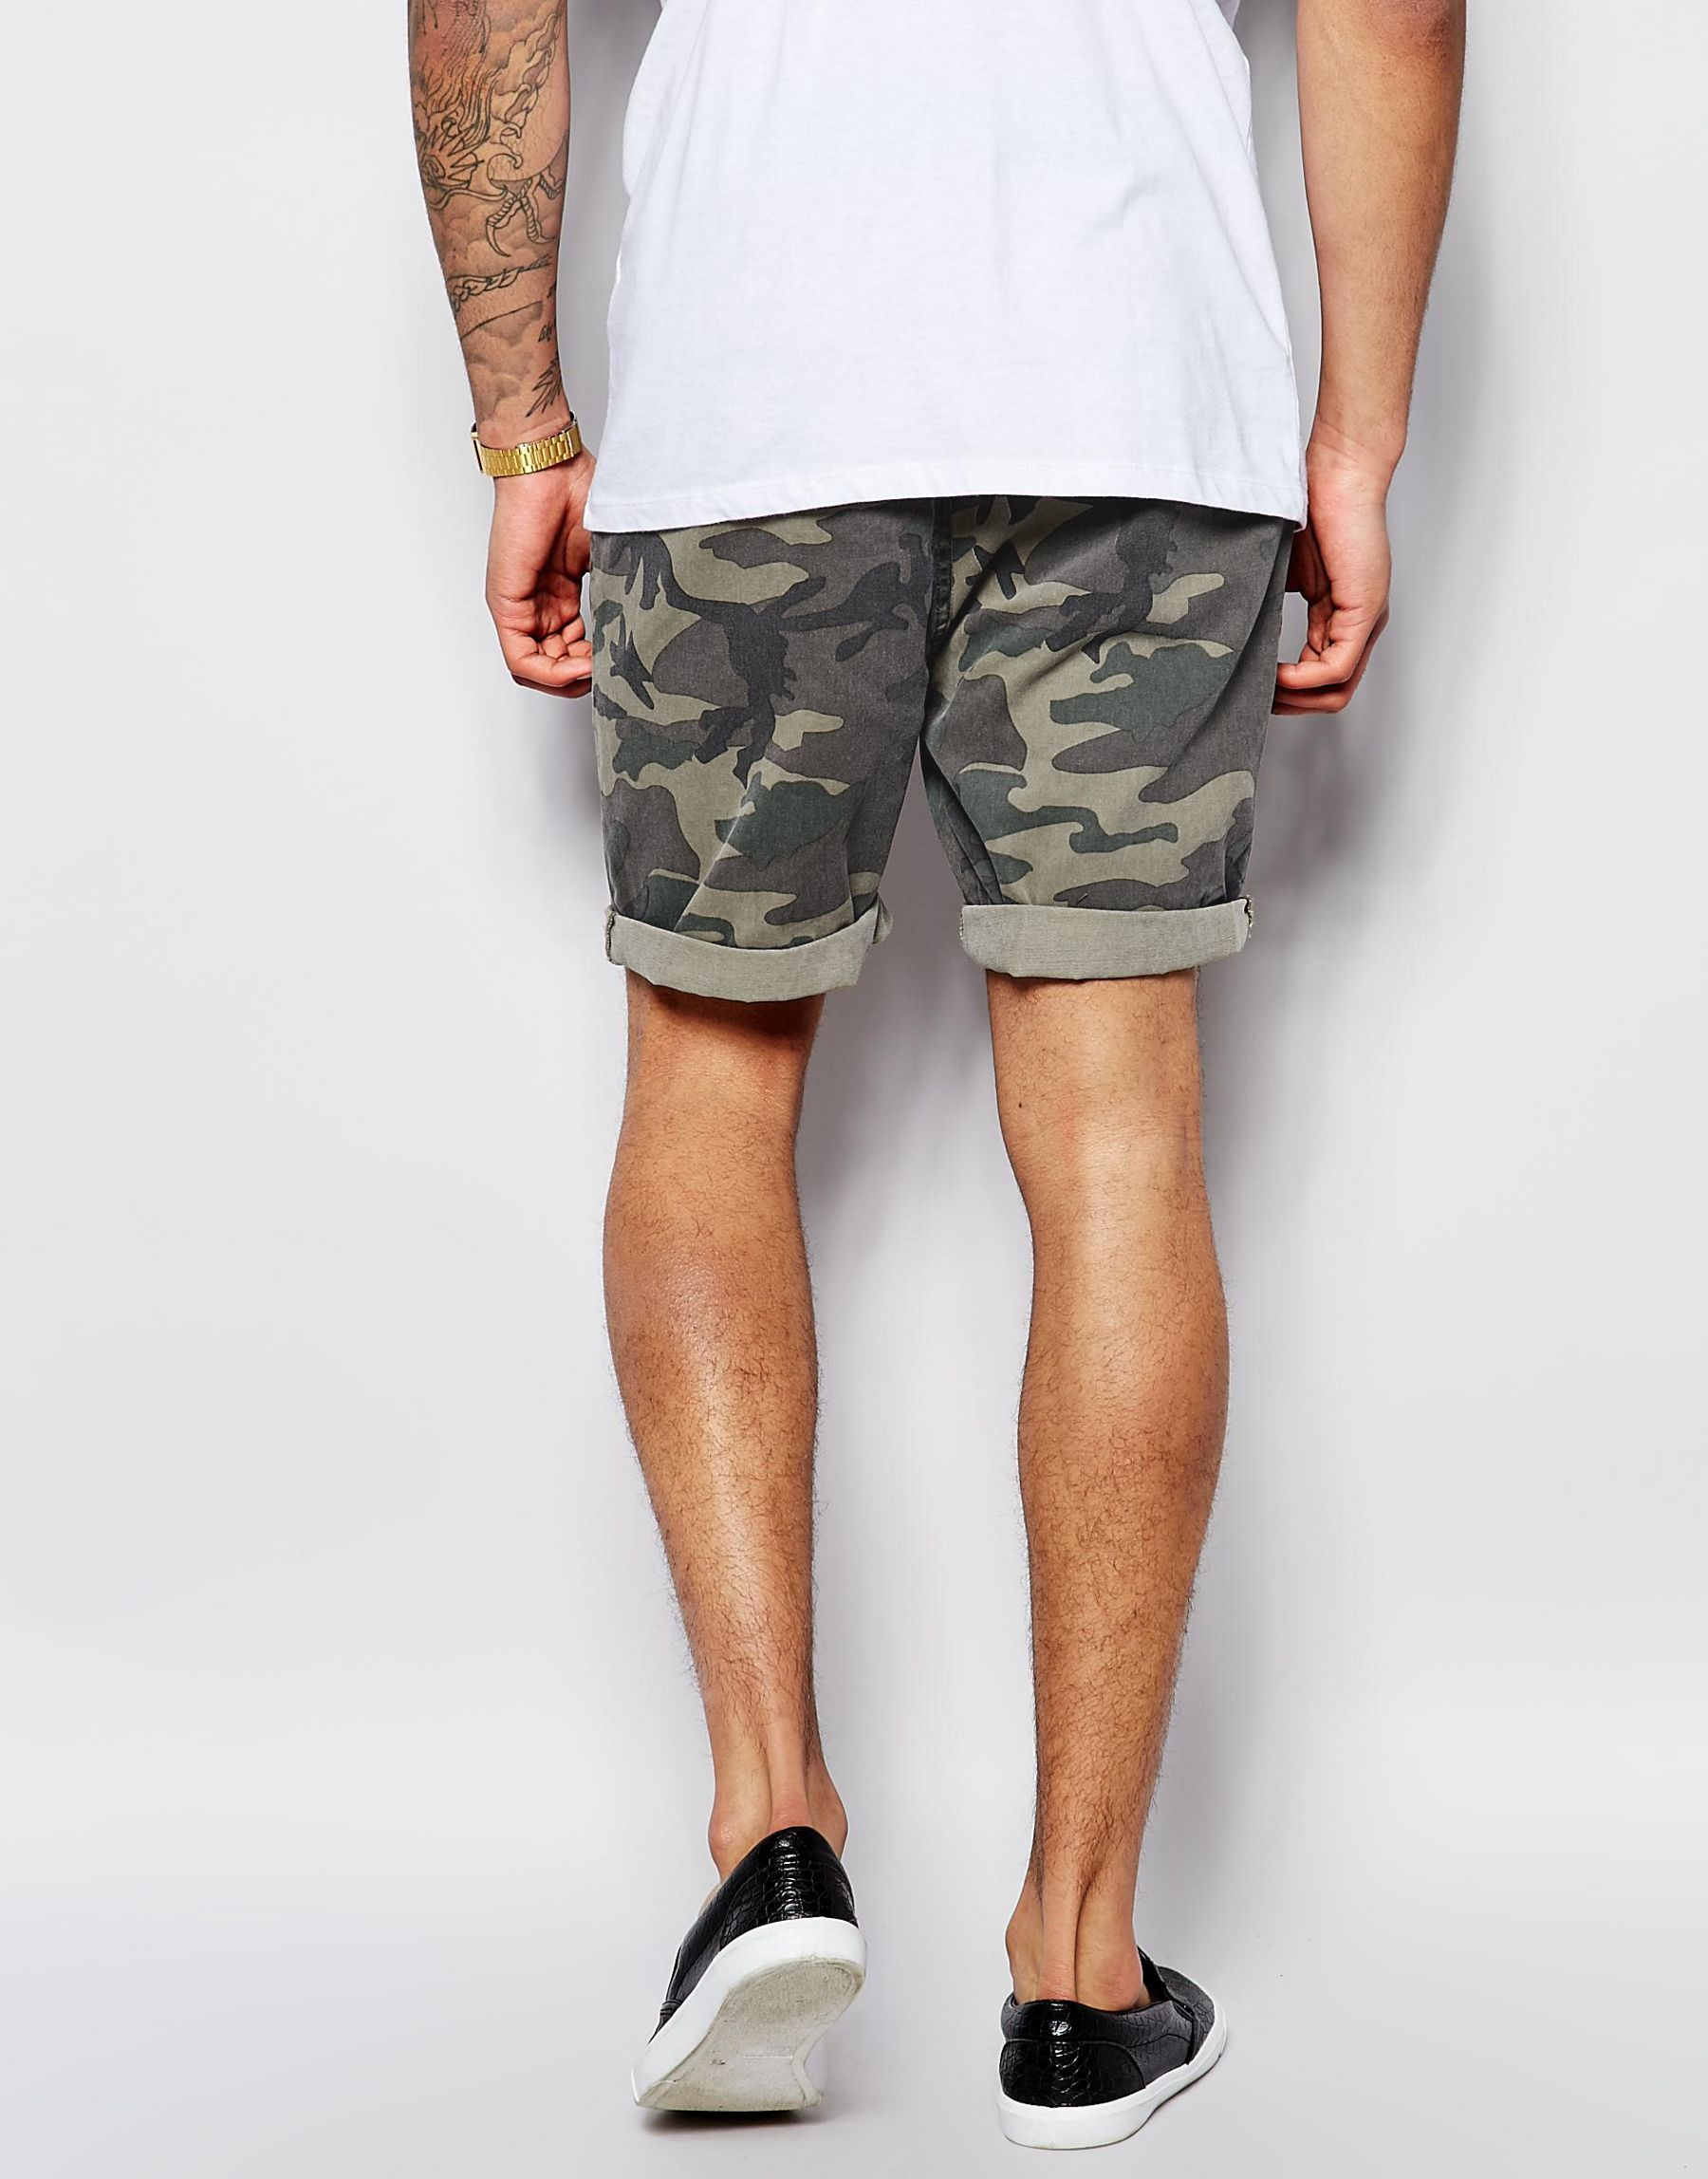 ASOS Cotton Chino Shorts With Camo Print in Khaki (Natural) for Men - Lyst